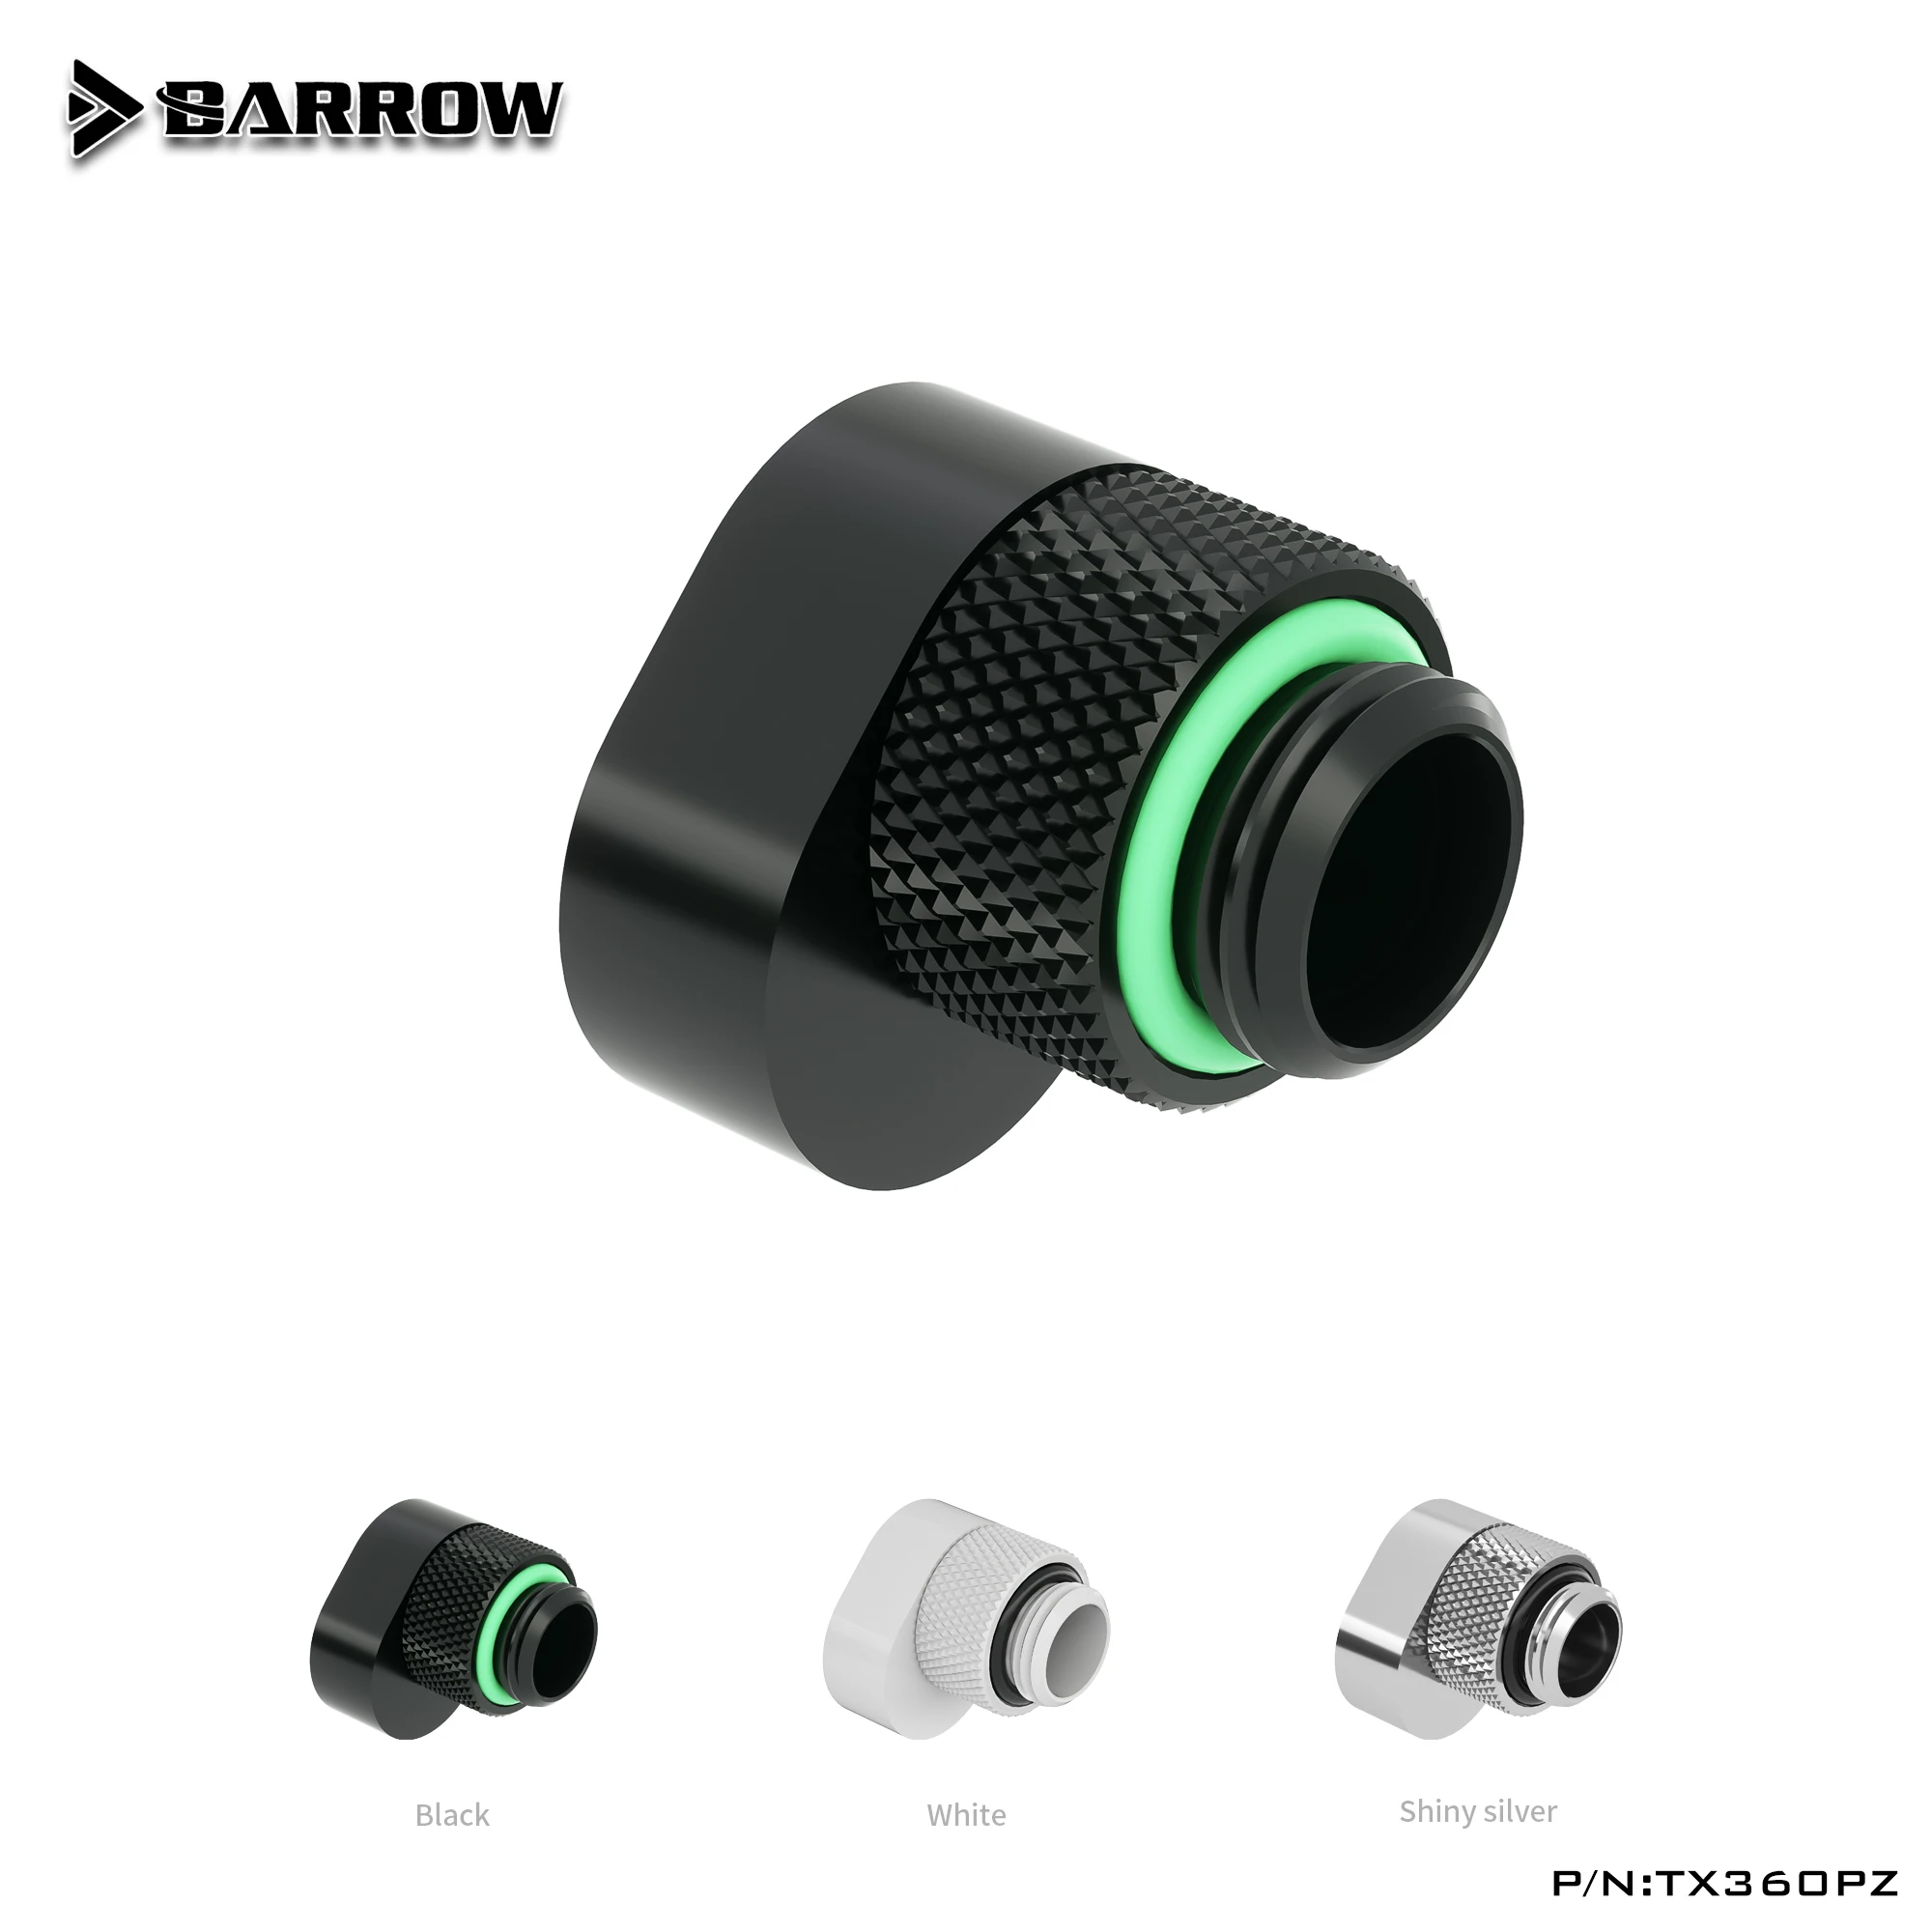 

Barrow G1/4" Fittings 360 Rotary Offset Connector Suitable Connection Less Than Or Equal To 6mm Adapter,TX360PZ